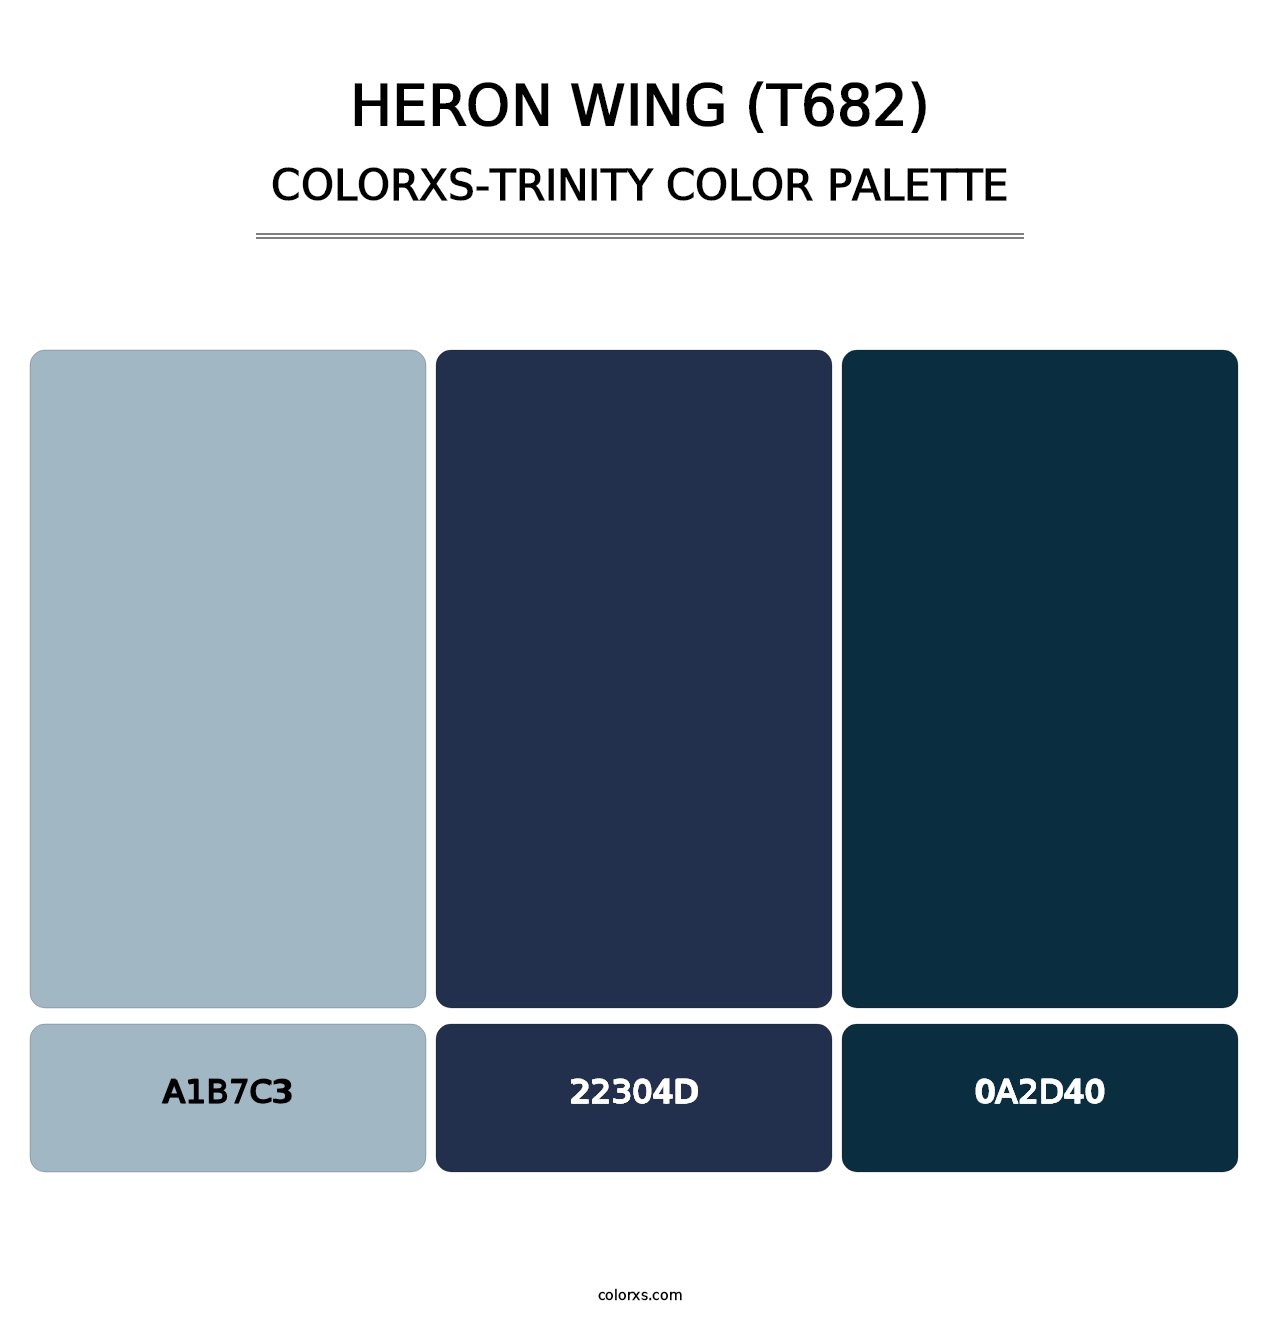 Heron Wing (T682) - Colorxs Trinity Palette